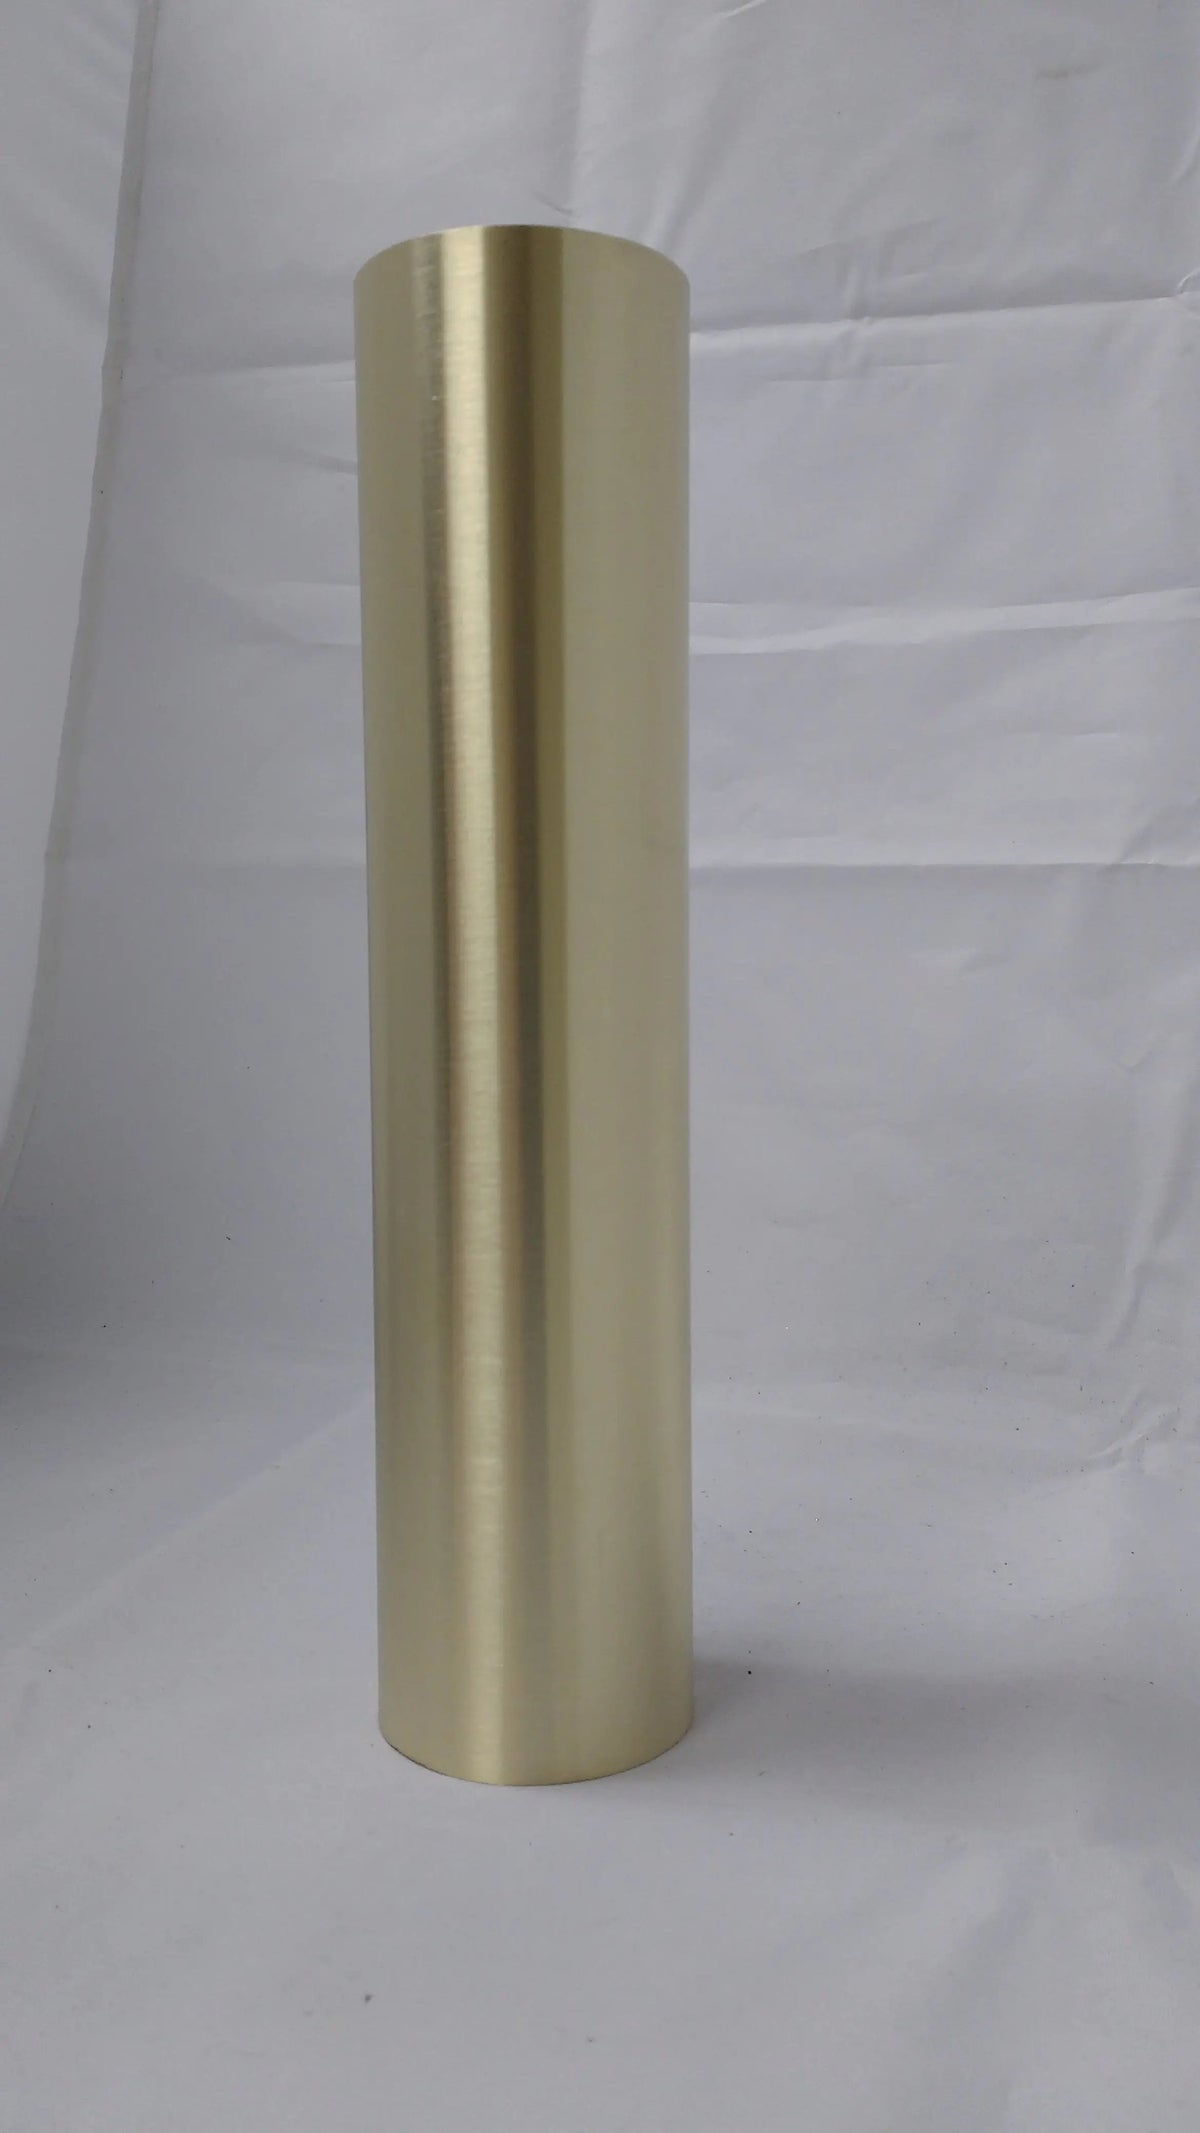 8 Foot Long Foot Rail Kit in Polished Brass - Trade Diversified